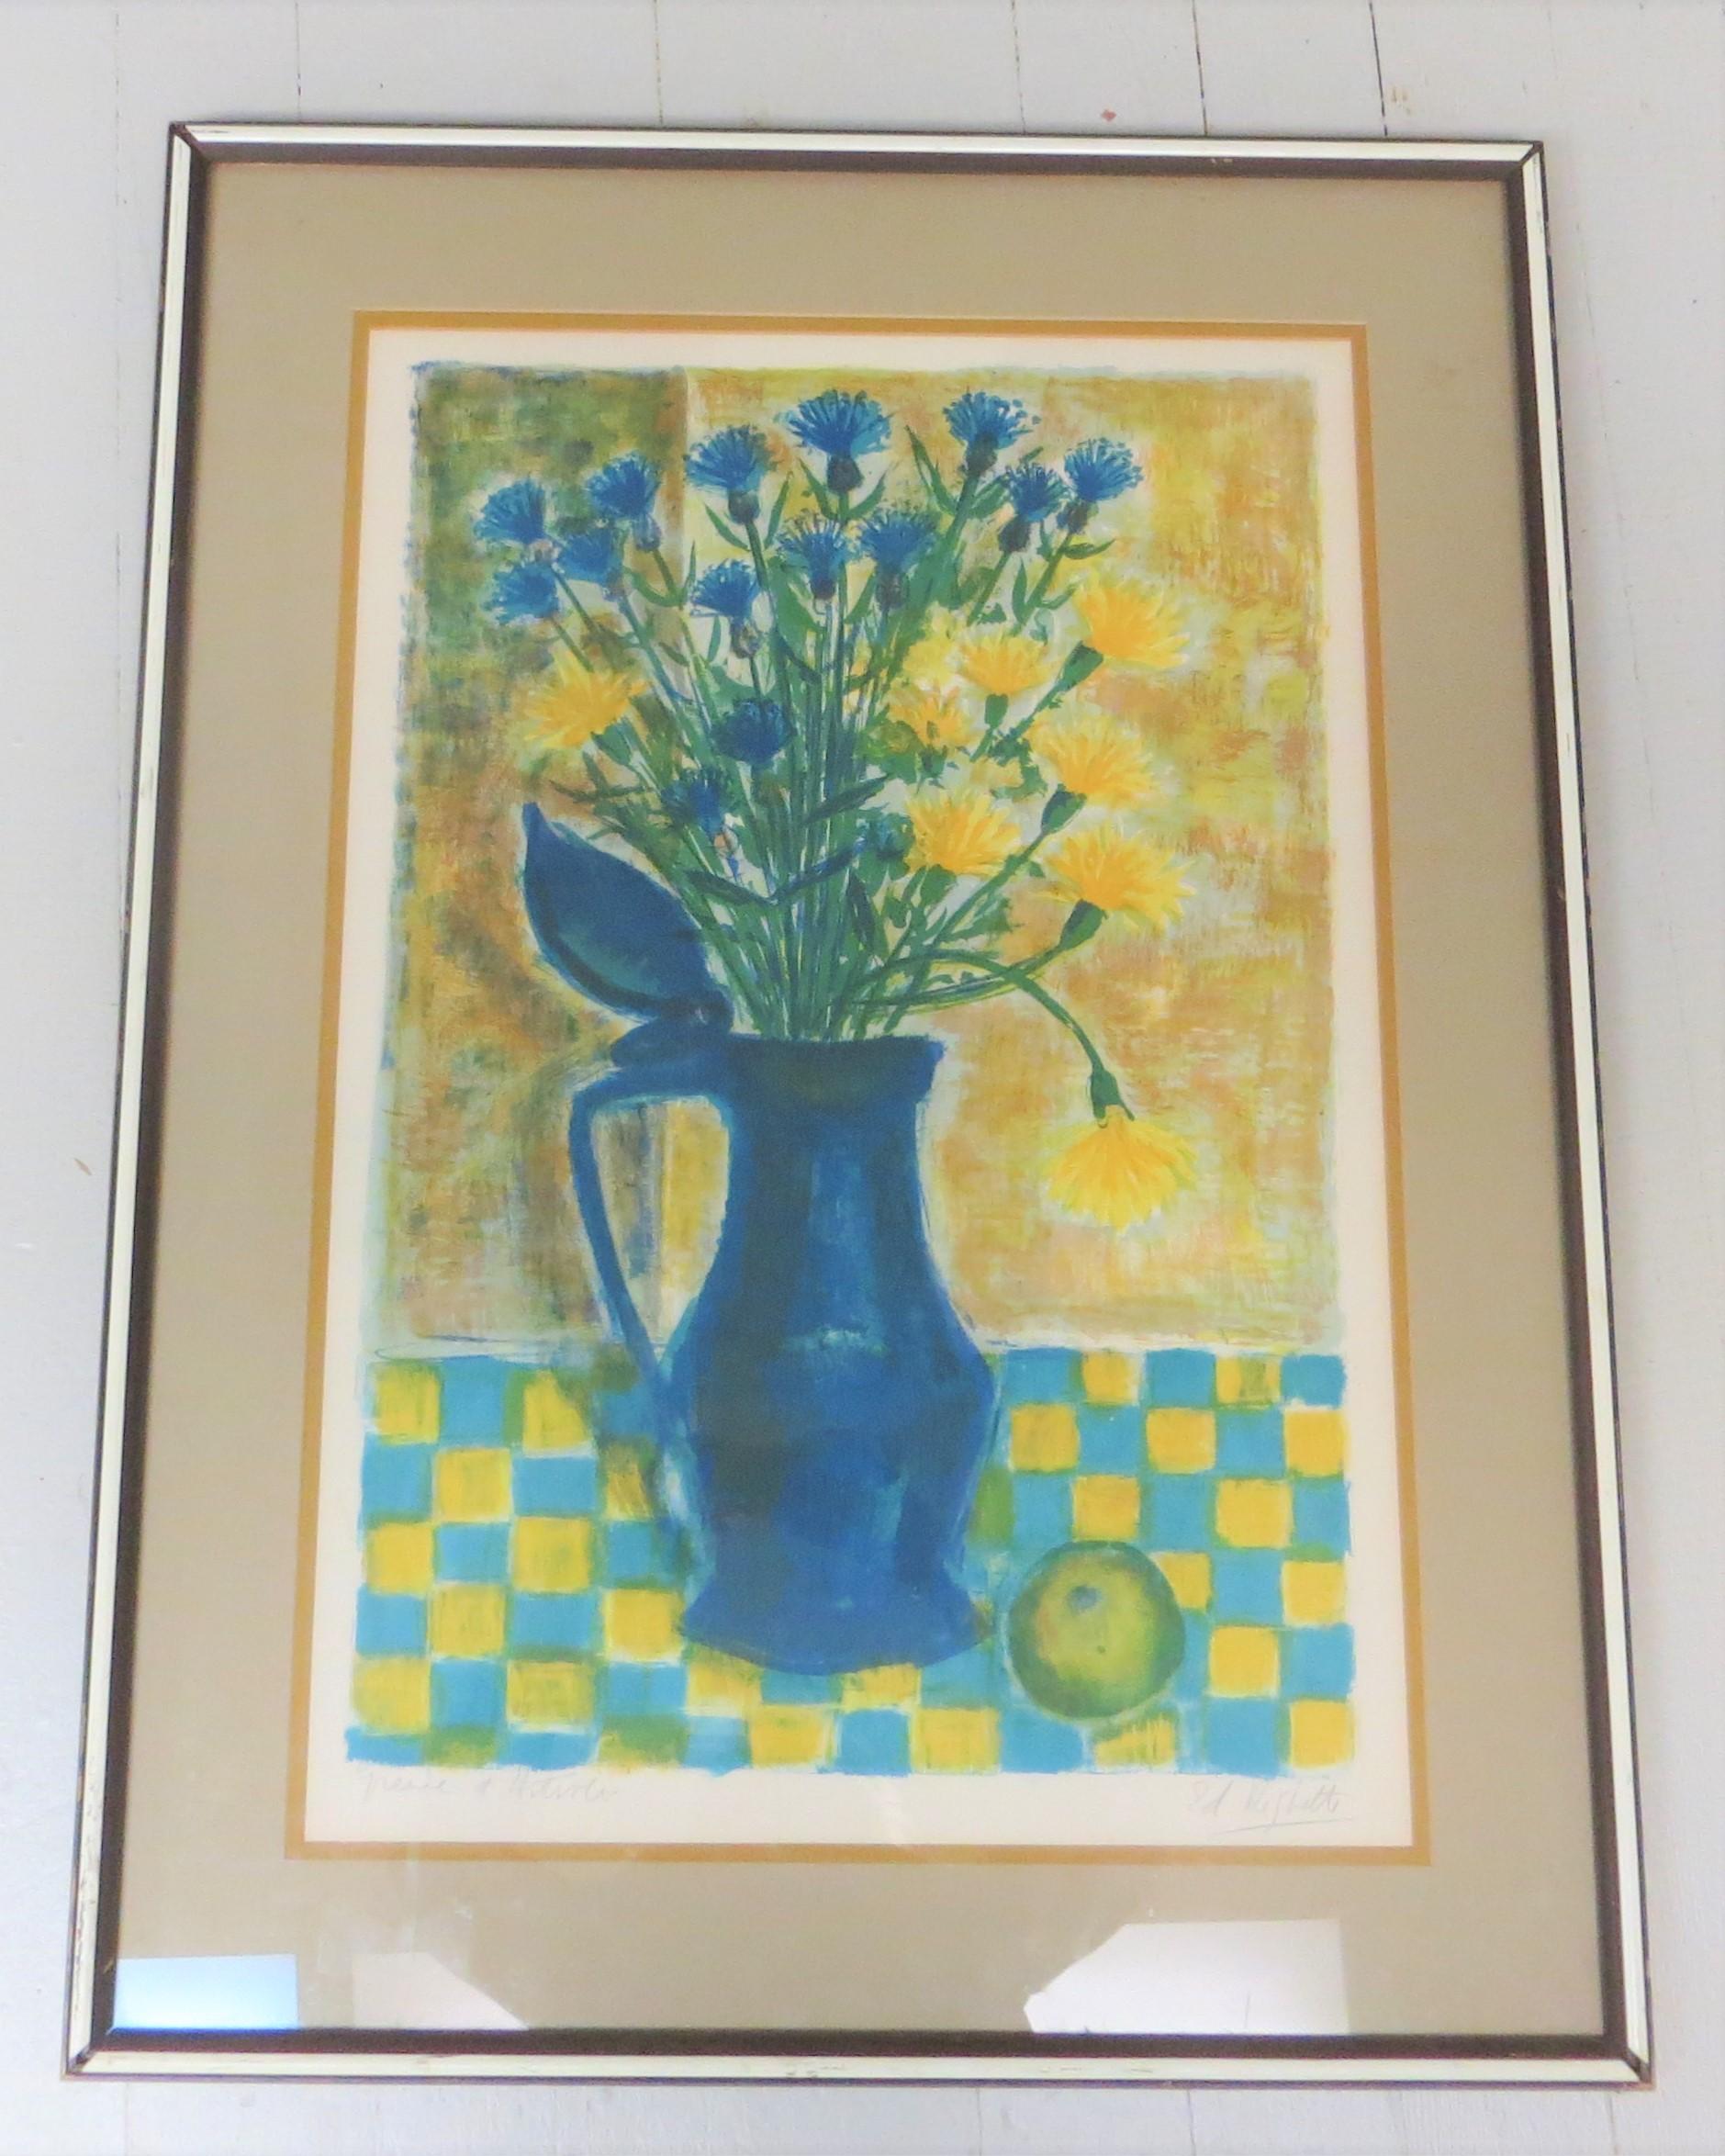 Flowers  in a Vase  - Contemporary Print by Edouard Righetti 